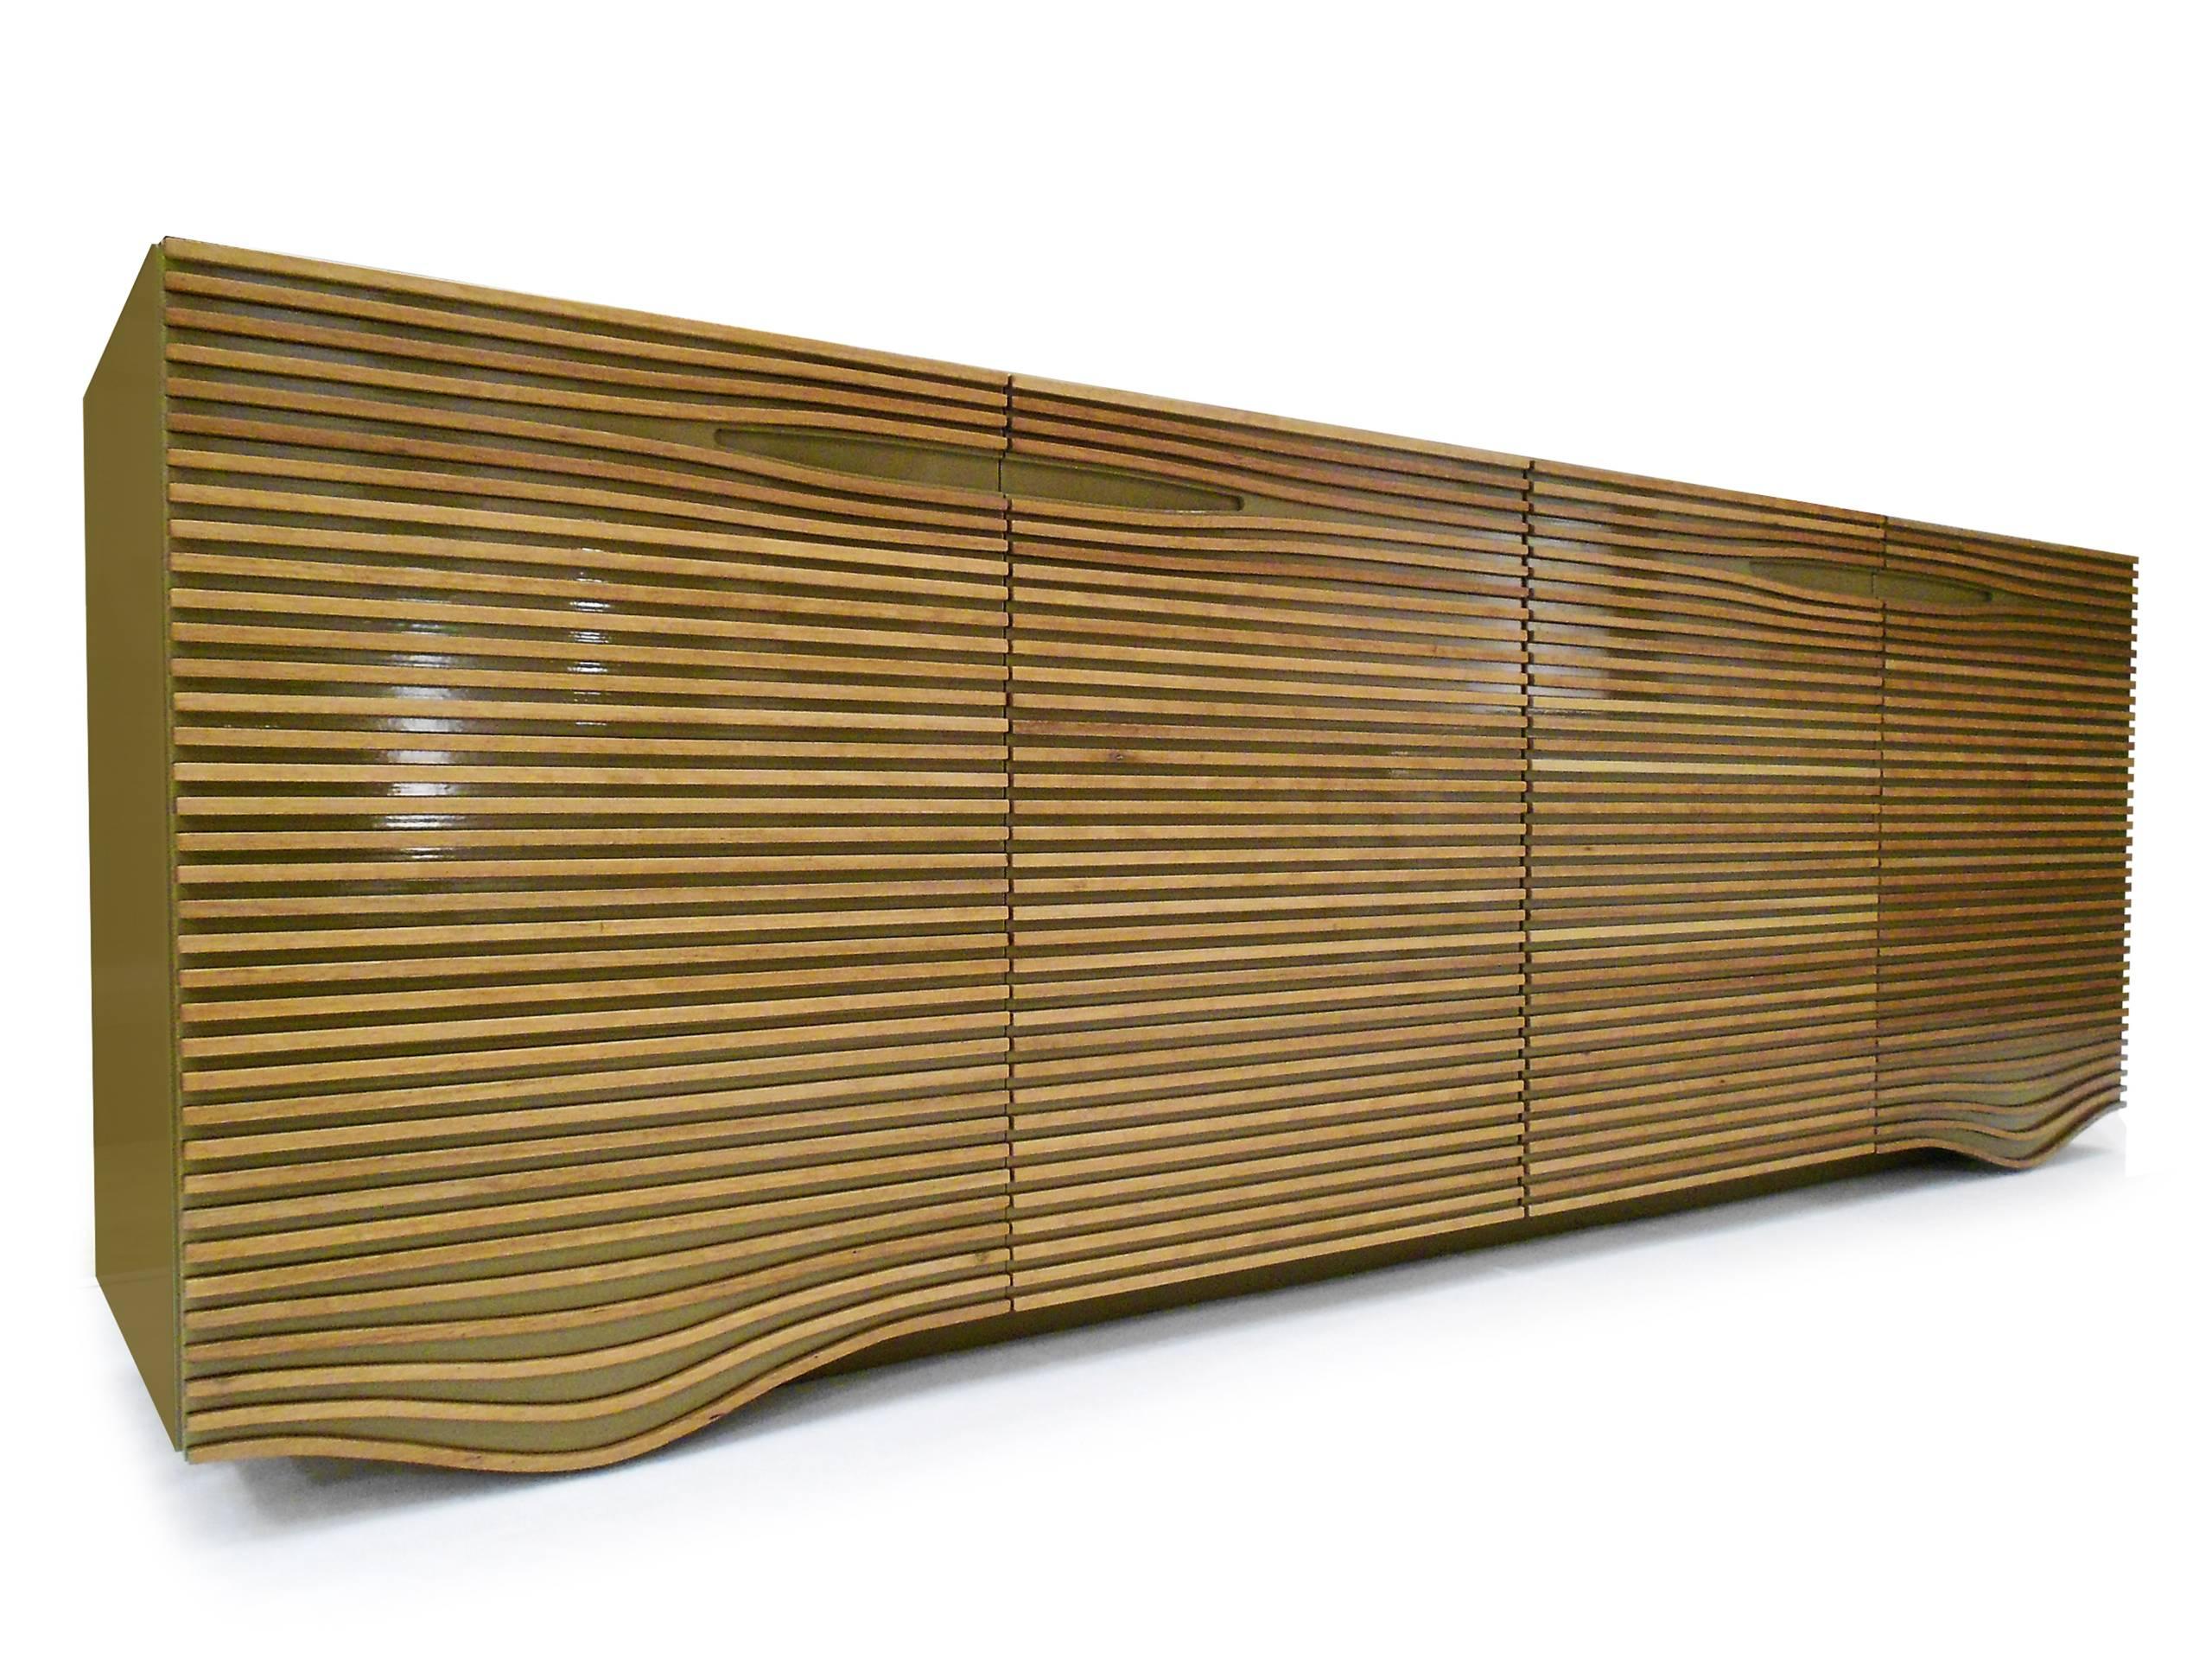 On this sideboard the horizontal lath twists at some sections giving an impression of movement to the doors’ surface, forming the support to the floor and openings for the doors handles. The result outlines a fluid surface which surprises precisely